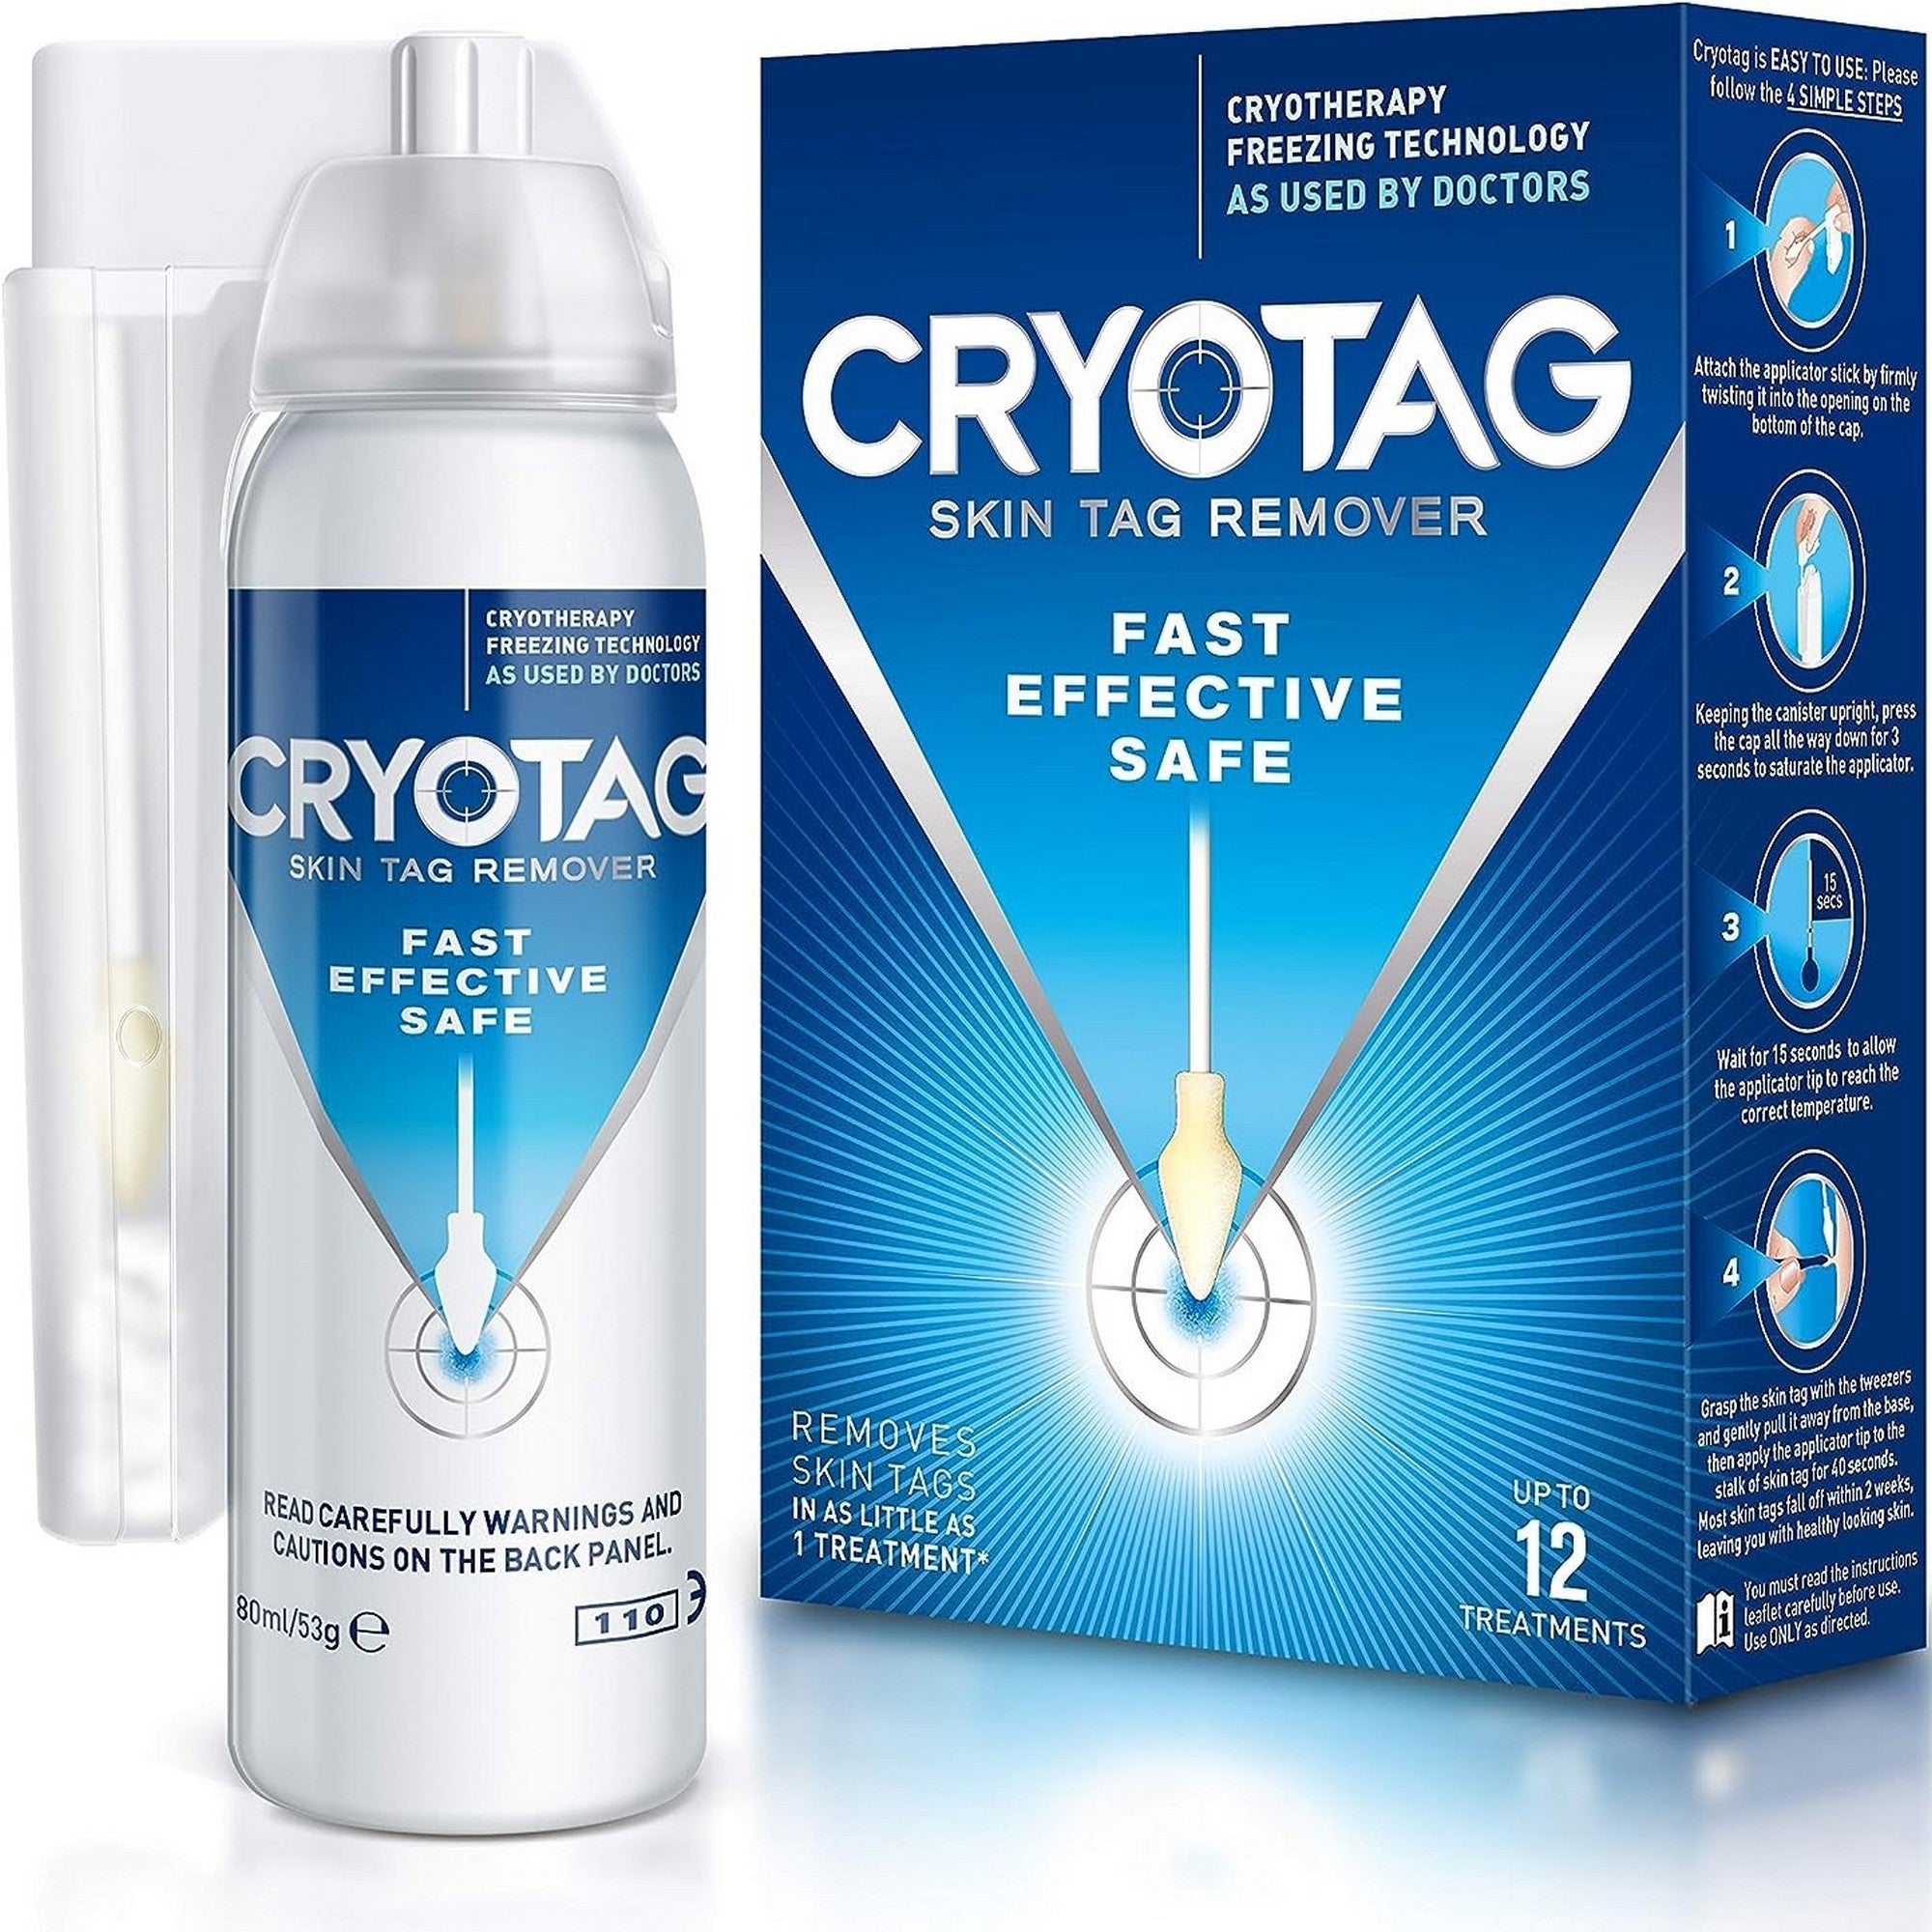 Cryotag Skin Tag Remover 80ml